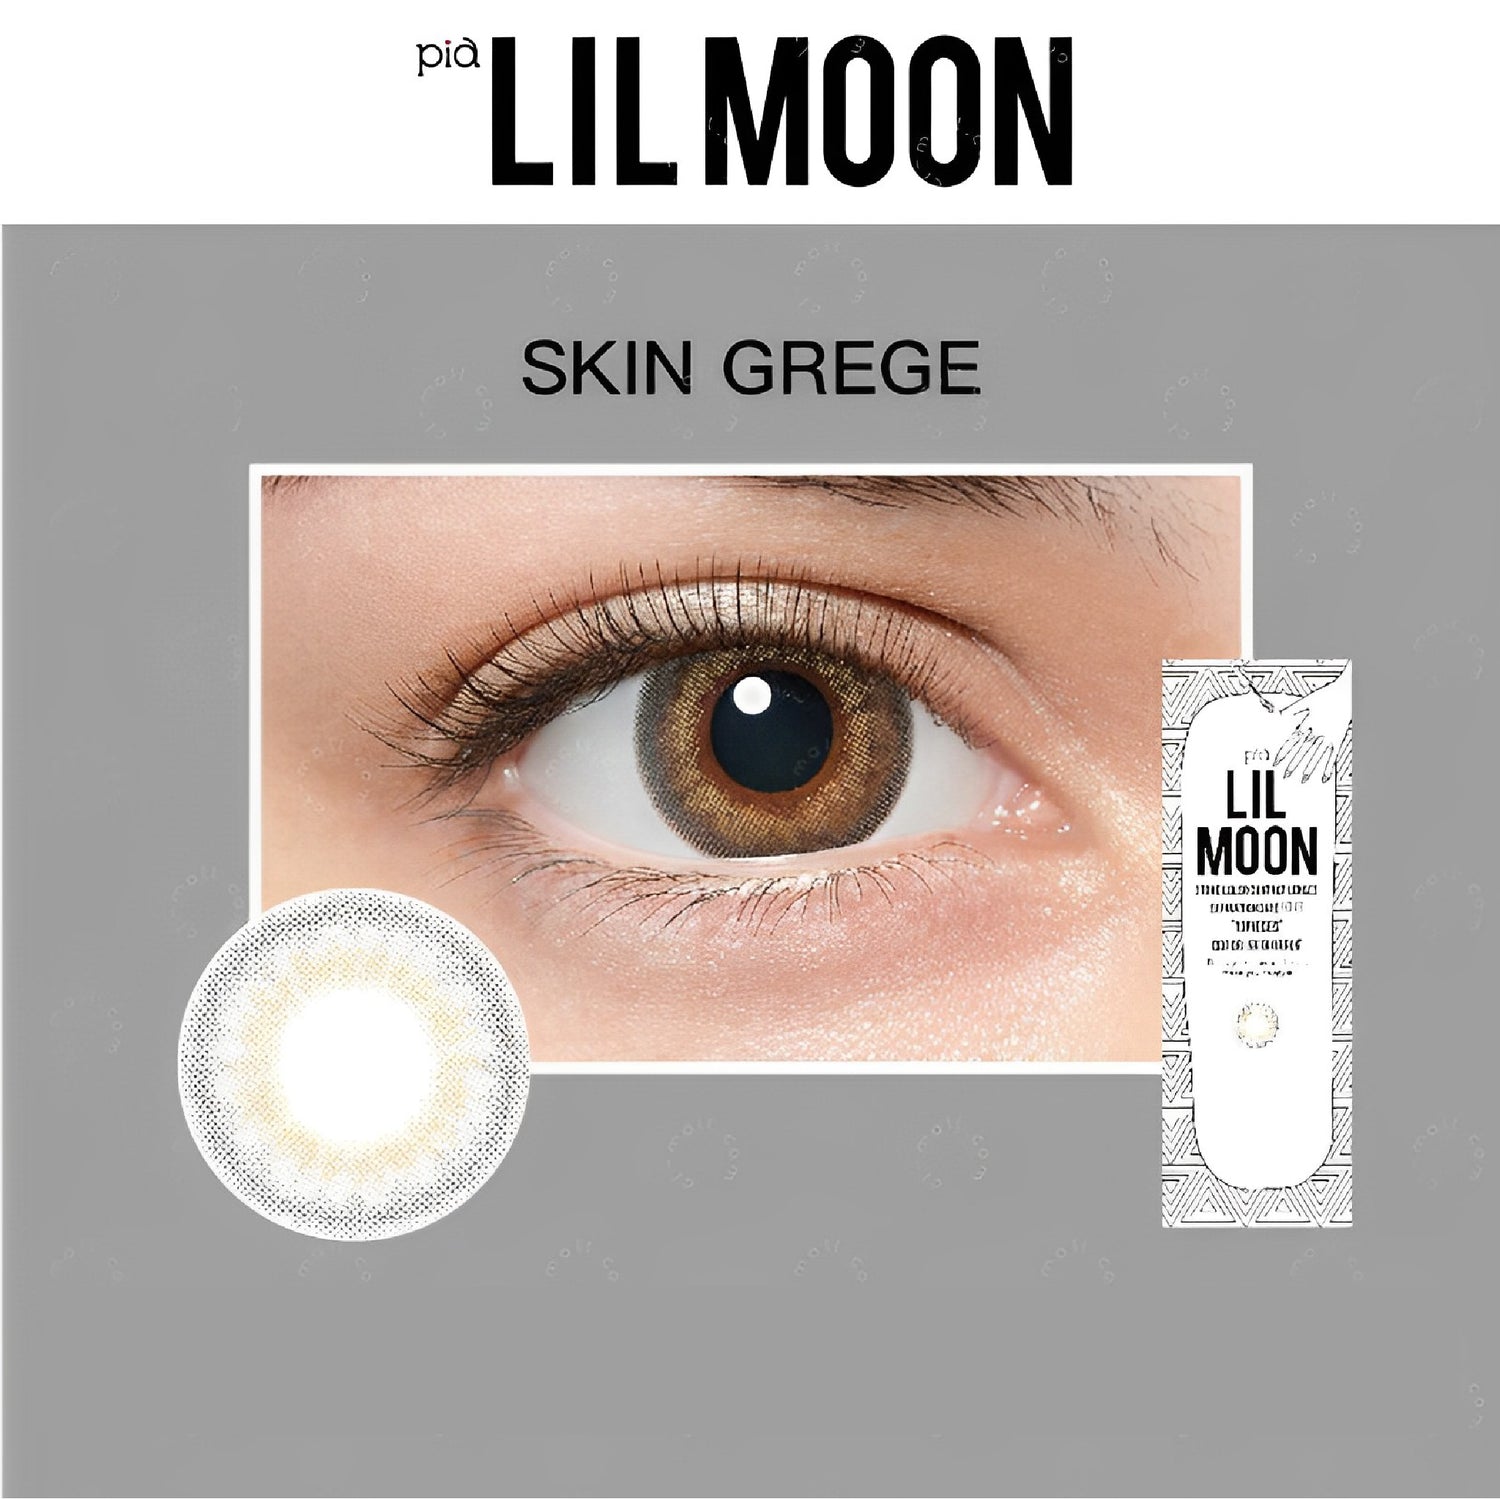 LIL MOON Monthy Contact Lenses-Skin Grege 1lens